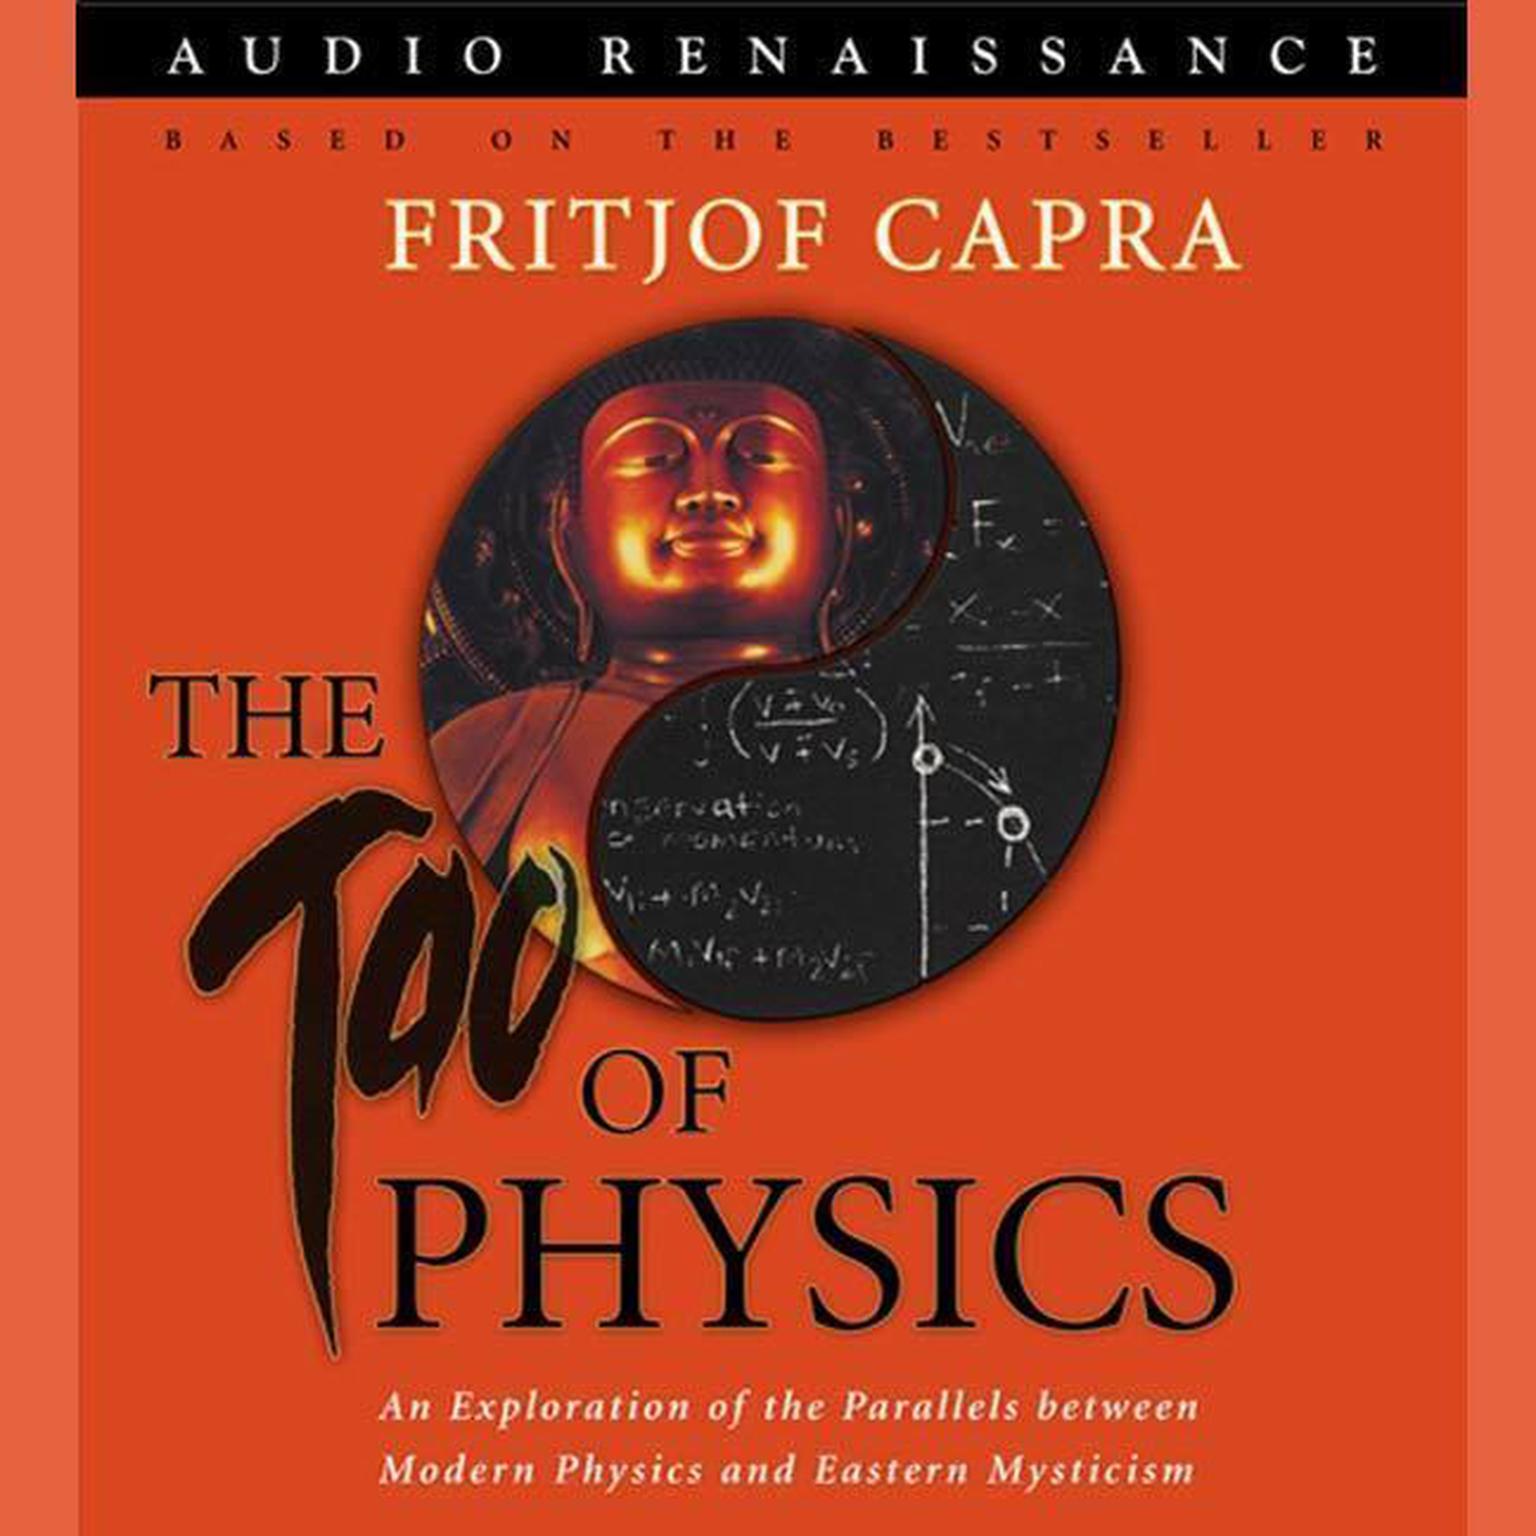 The Tao of Physics (Abridged): An Exploration of the Parallels between Modern Physics and Eastern Mysticism Audiobook, by Fritjof Capra